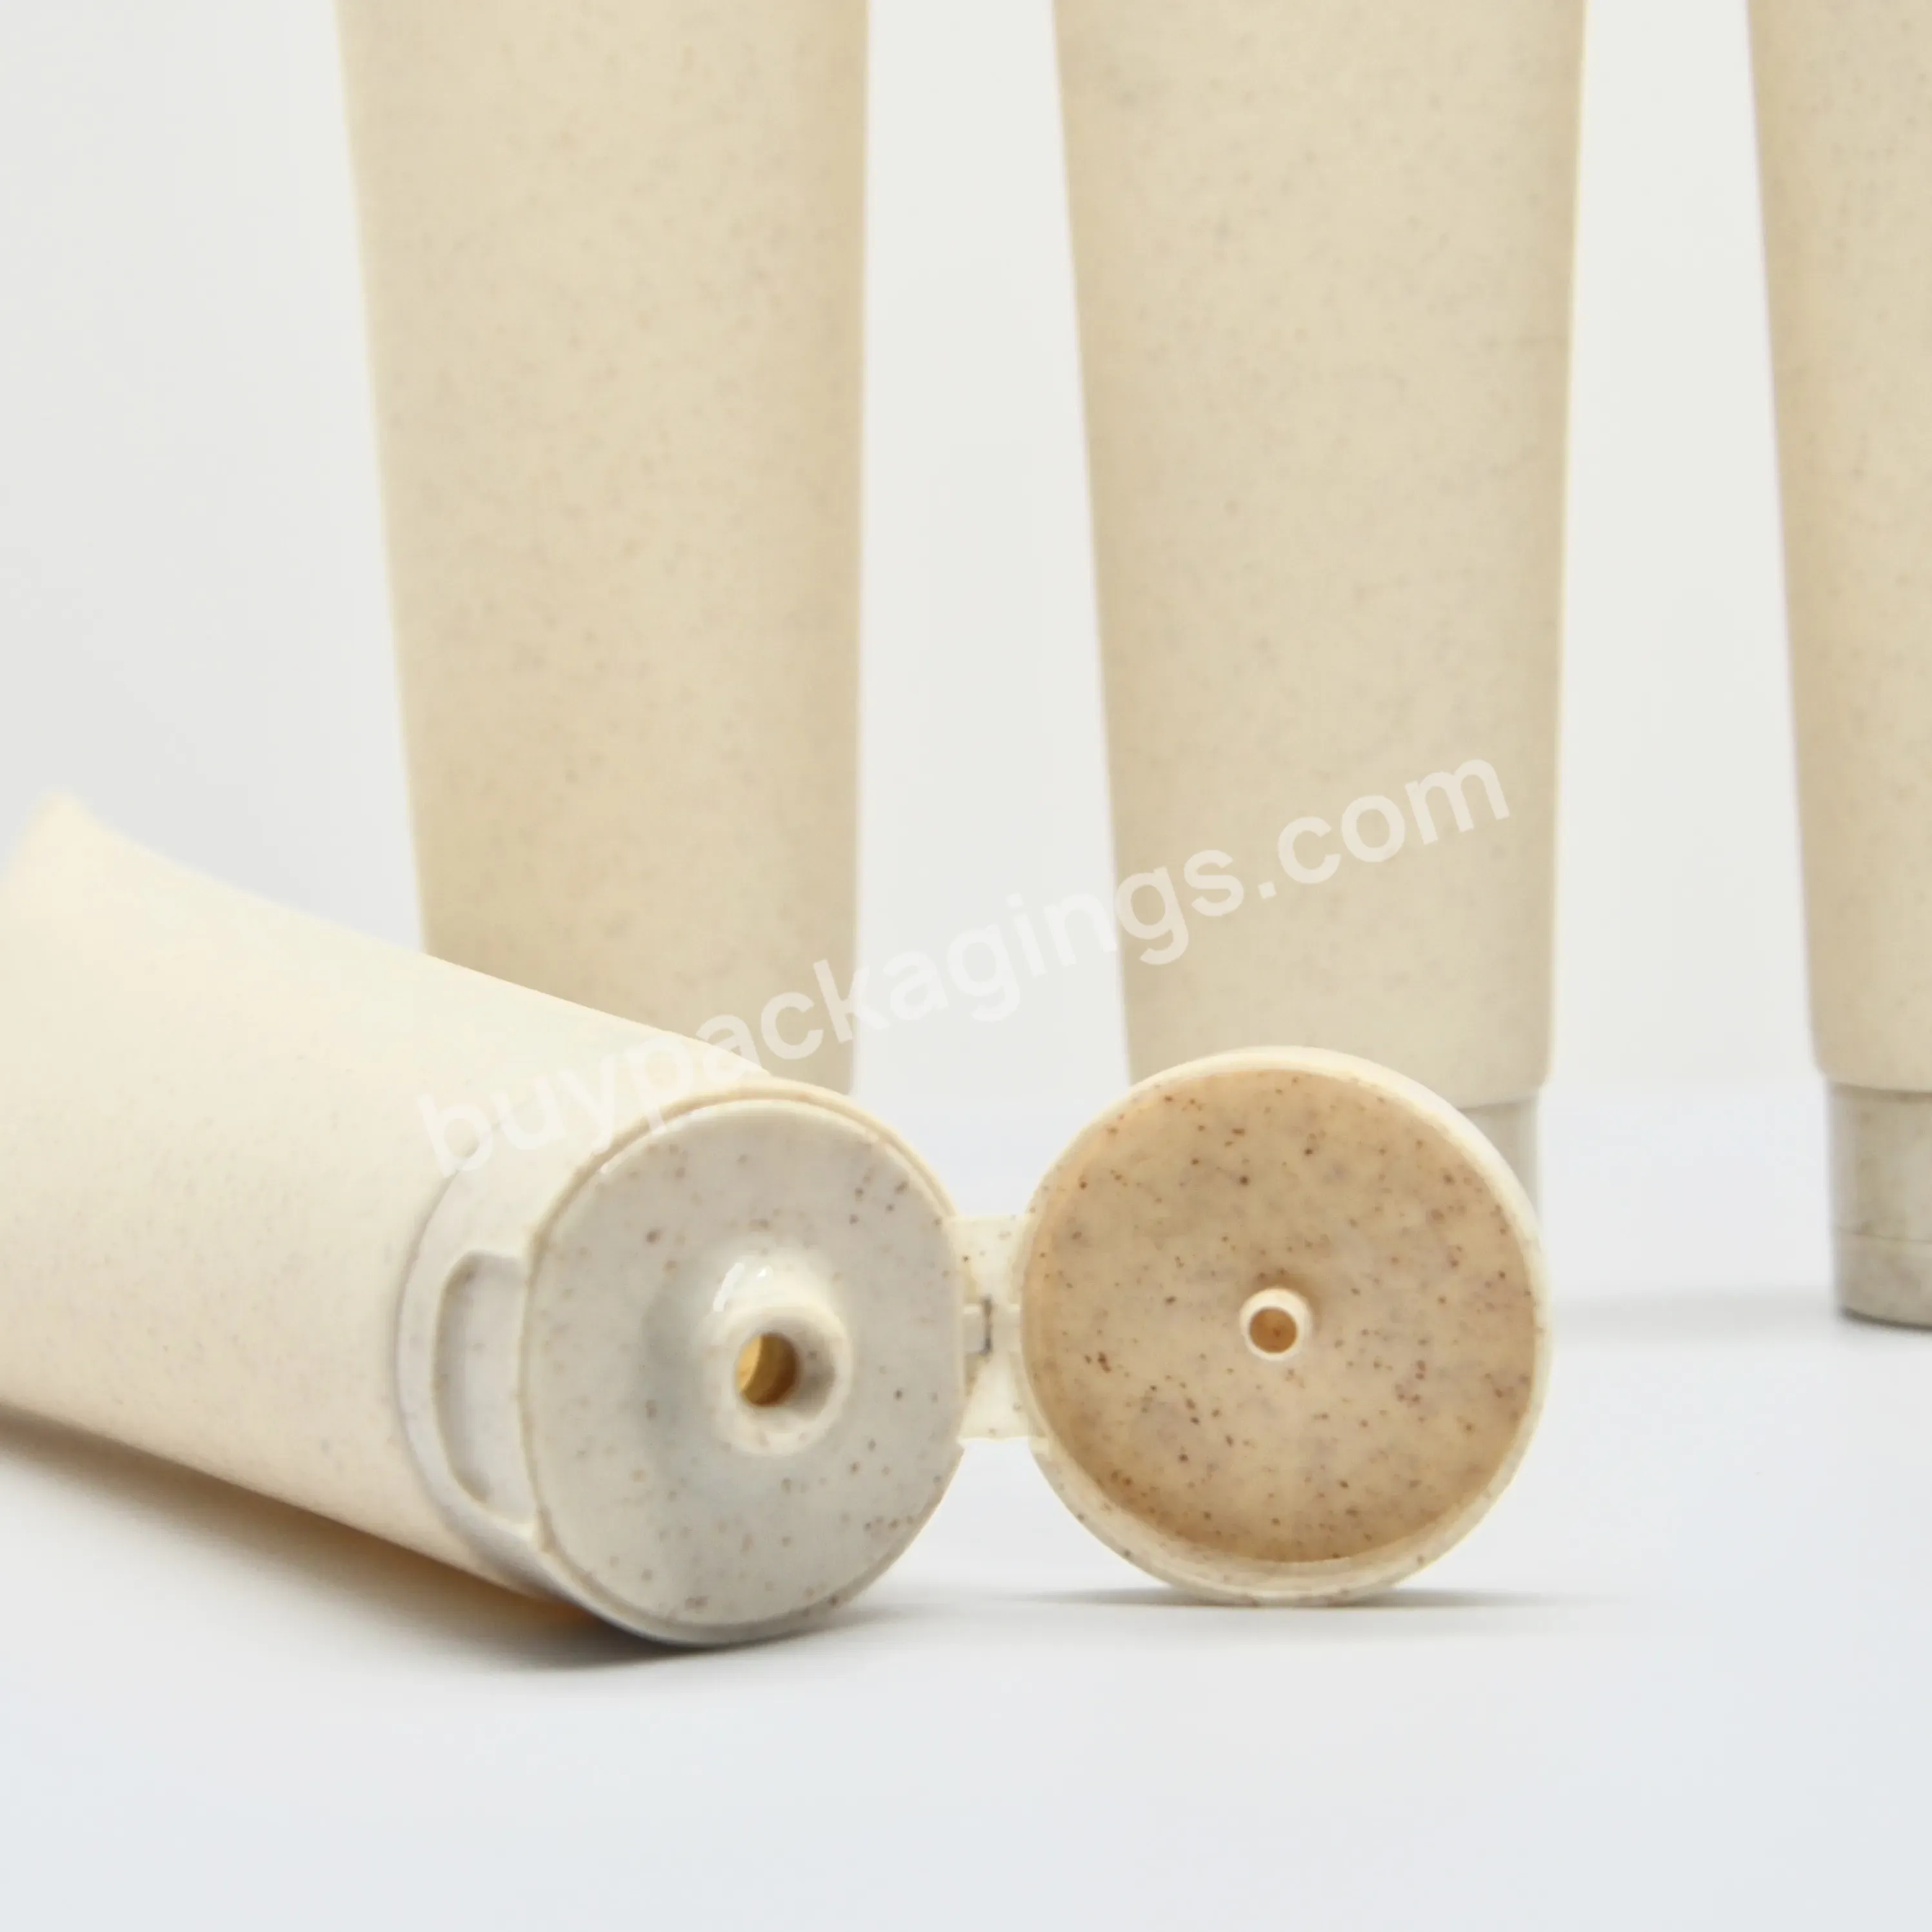 Biodegradable Plastic Facial Cleanser Tube 50ml/100ml/200ml Skin Care Lotion Packaging Wheat Straw Bottles - Buy Eco Friendly Cosmetic Packaging,Biodegradable Plastic Packing,Skin Care Wheat Straw Packing.